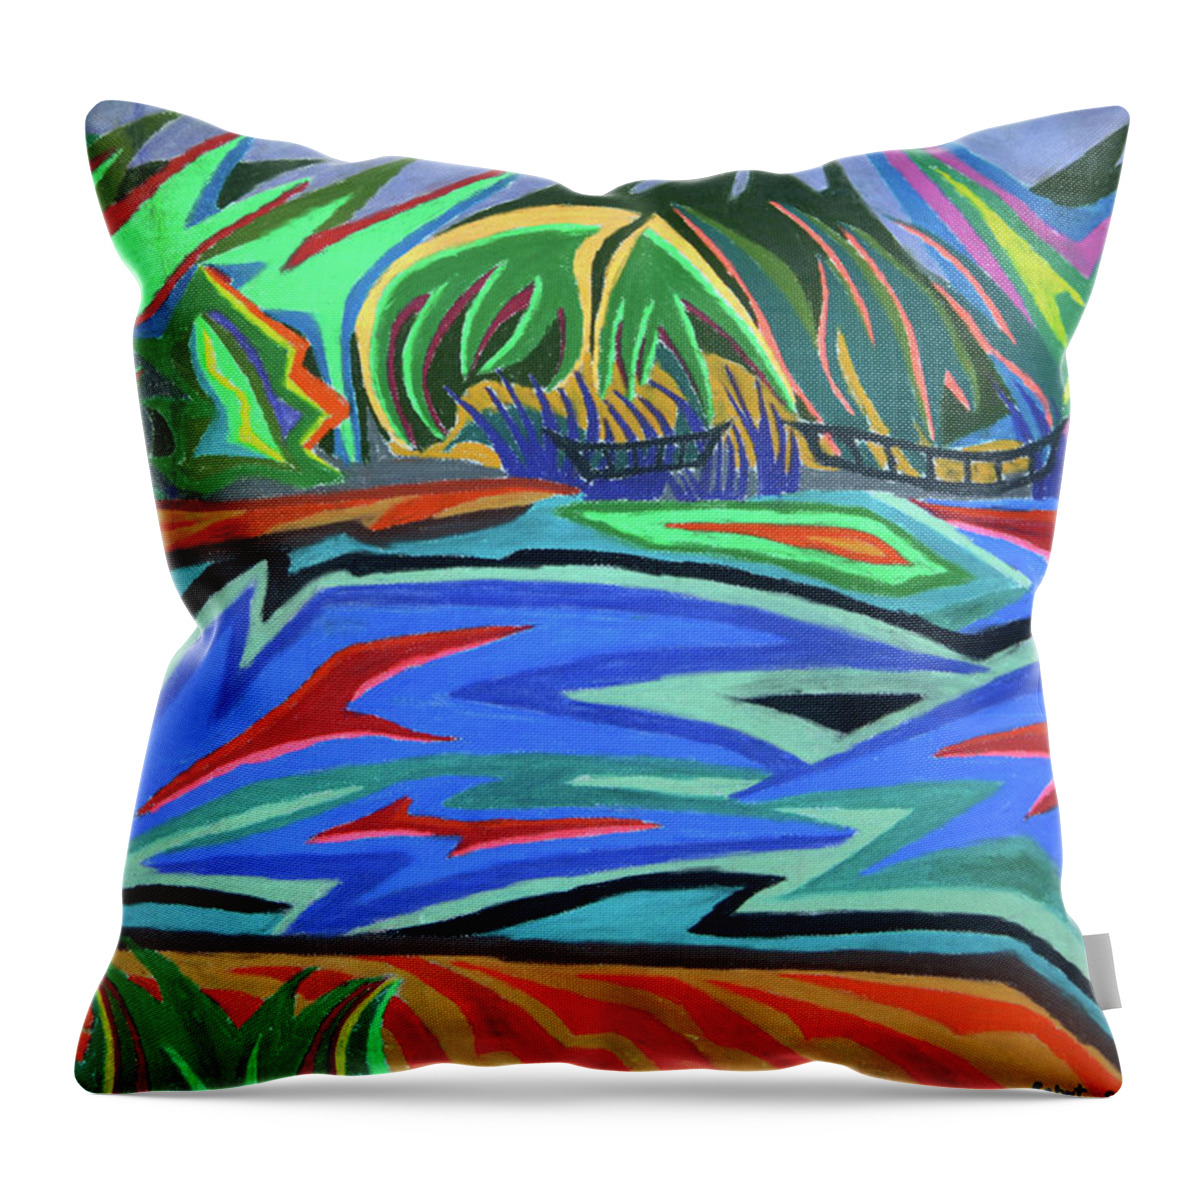 Laureate Throw Pillow featuring the painting Lac Aura by Robert SORENSEN